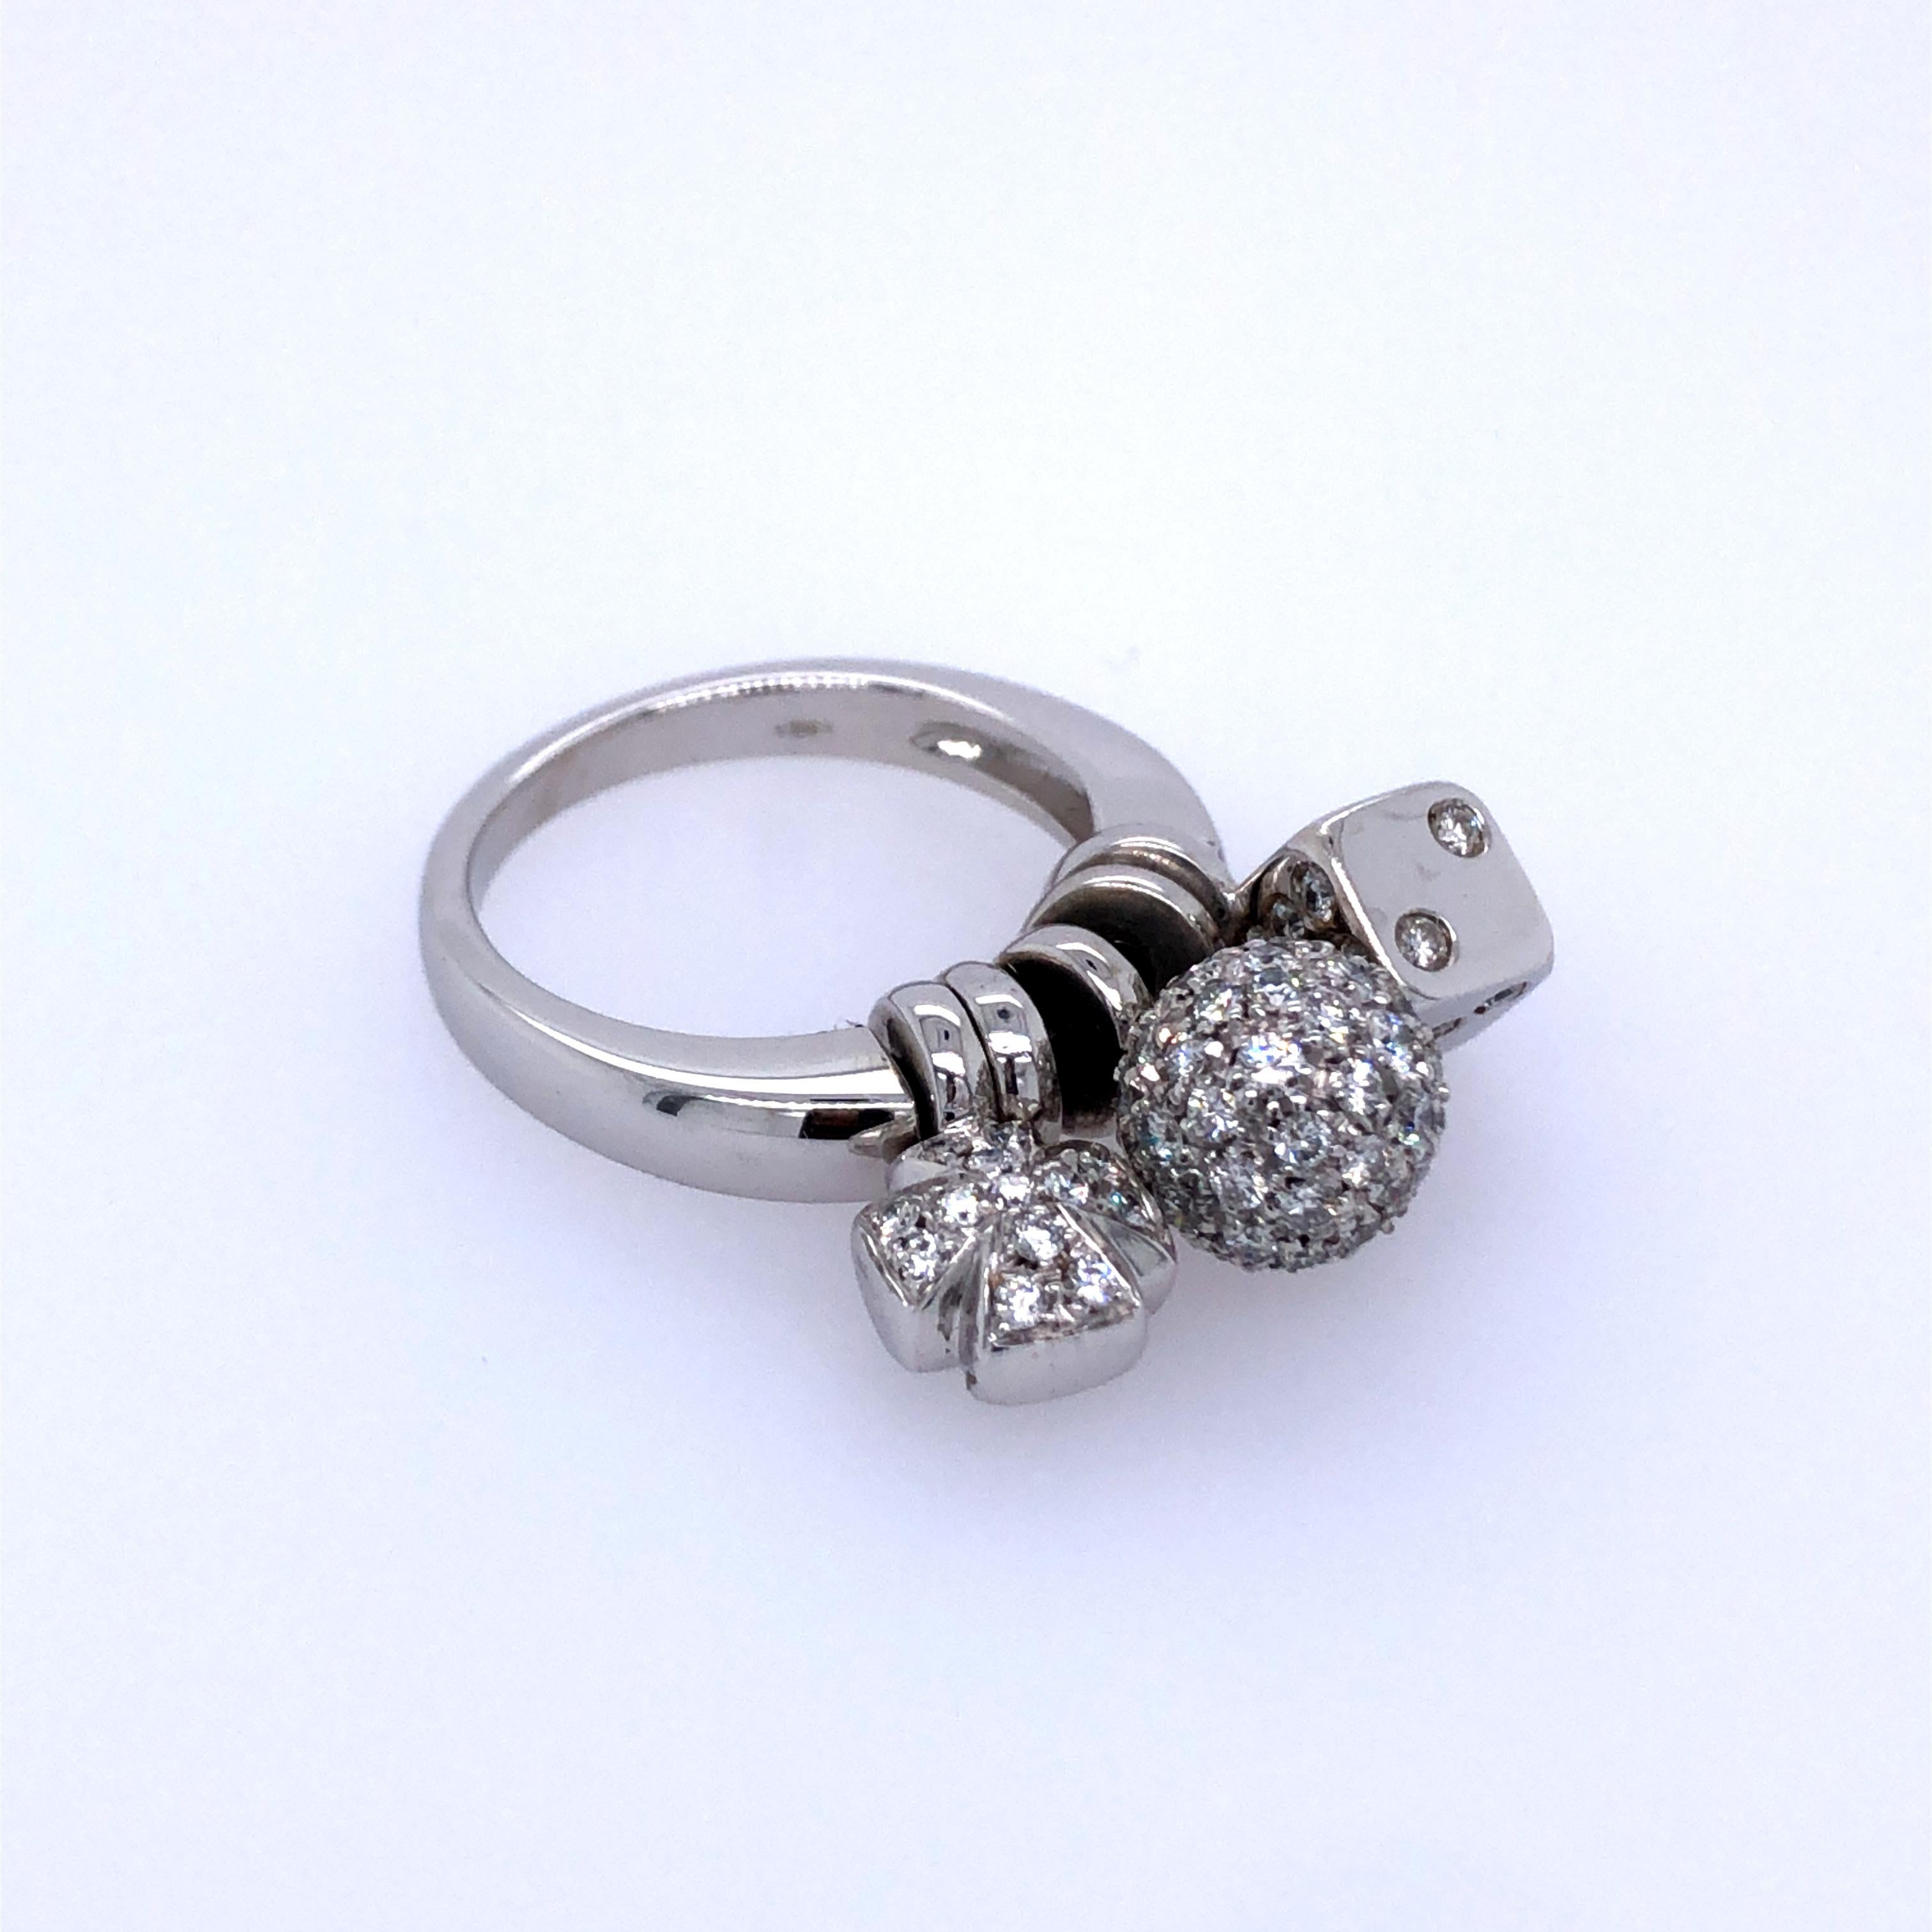 Of three articulated charms, a die, sphere, and Maltese cross, pavé-set with round brilliant-cut diamonds
18k white gold Ring size 7; Gross weight 13.9g 8.9 dwts 